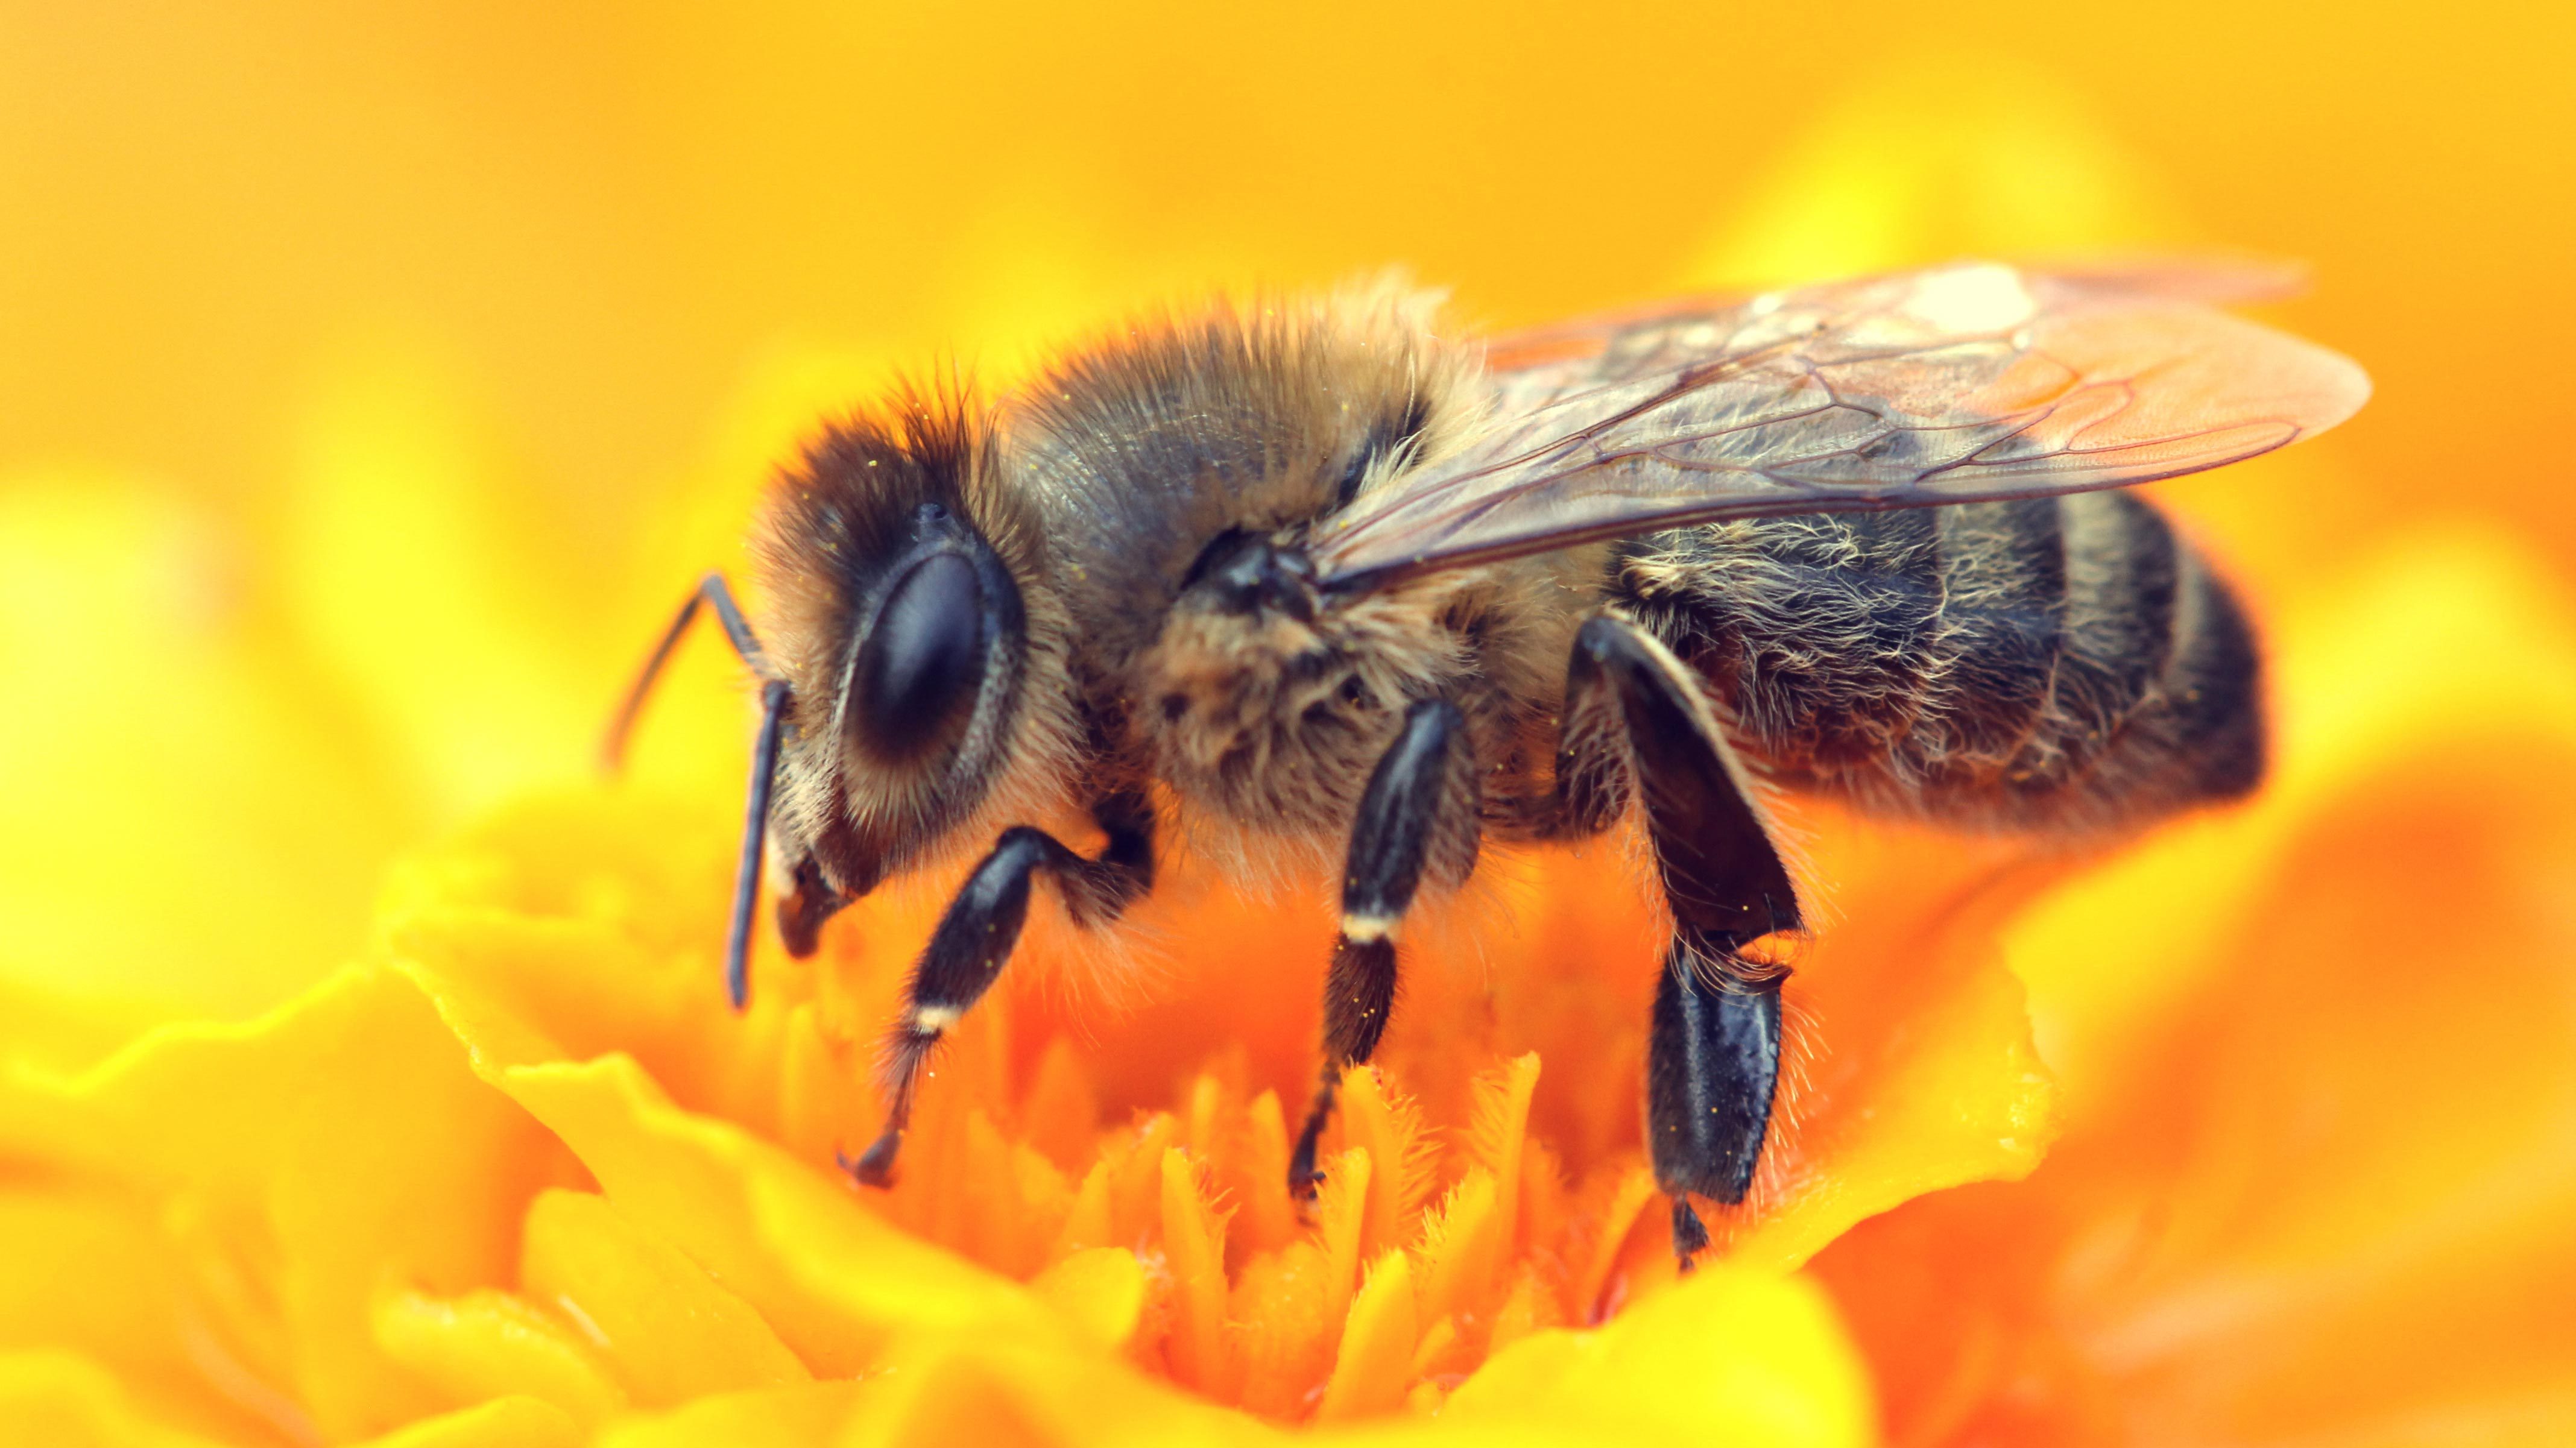 How We Can Help Honeybees Every Day | Reader's Digest